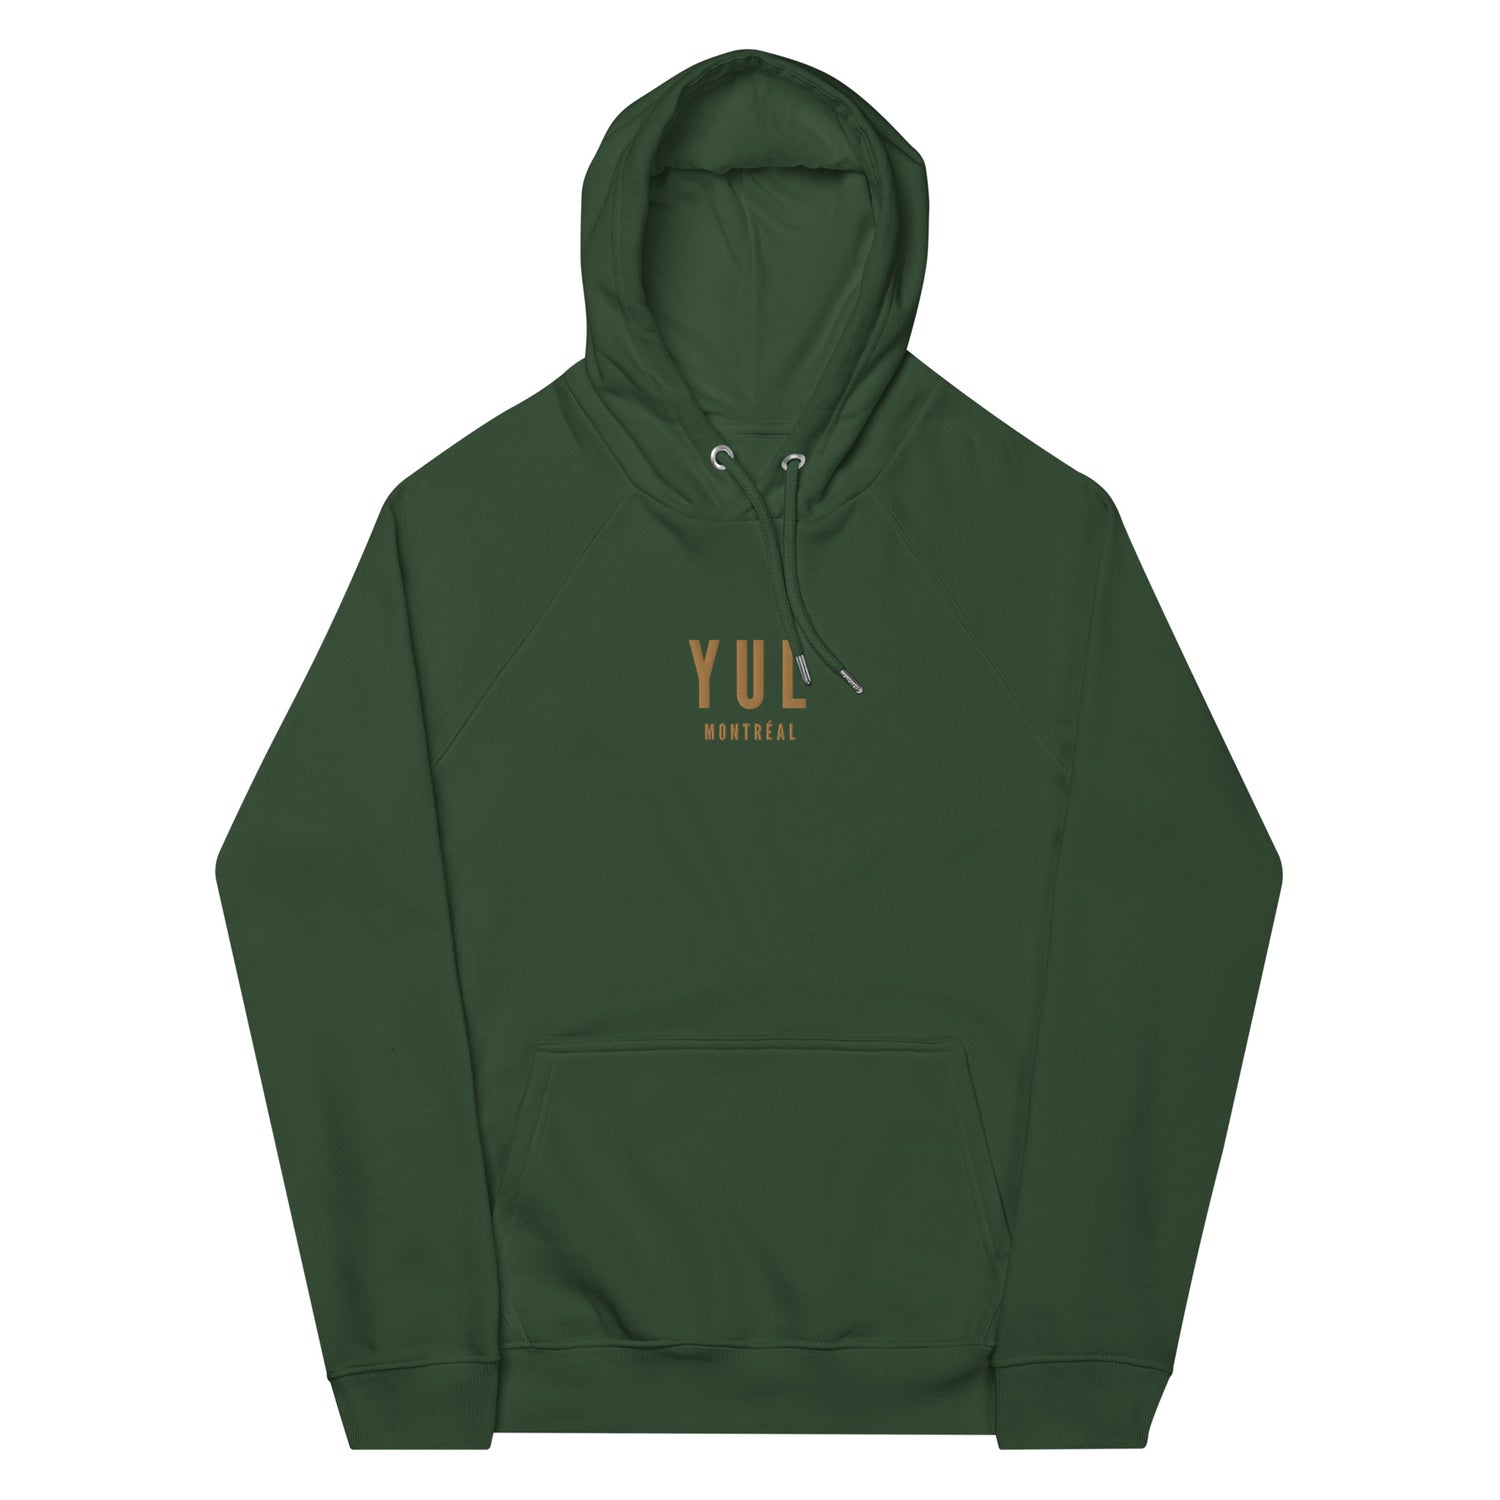 Montreal Quebec Hoodies and Sweatshirts • YUL Airport Code